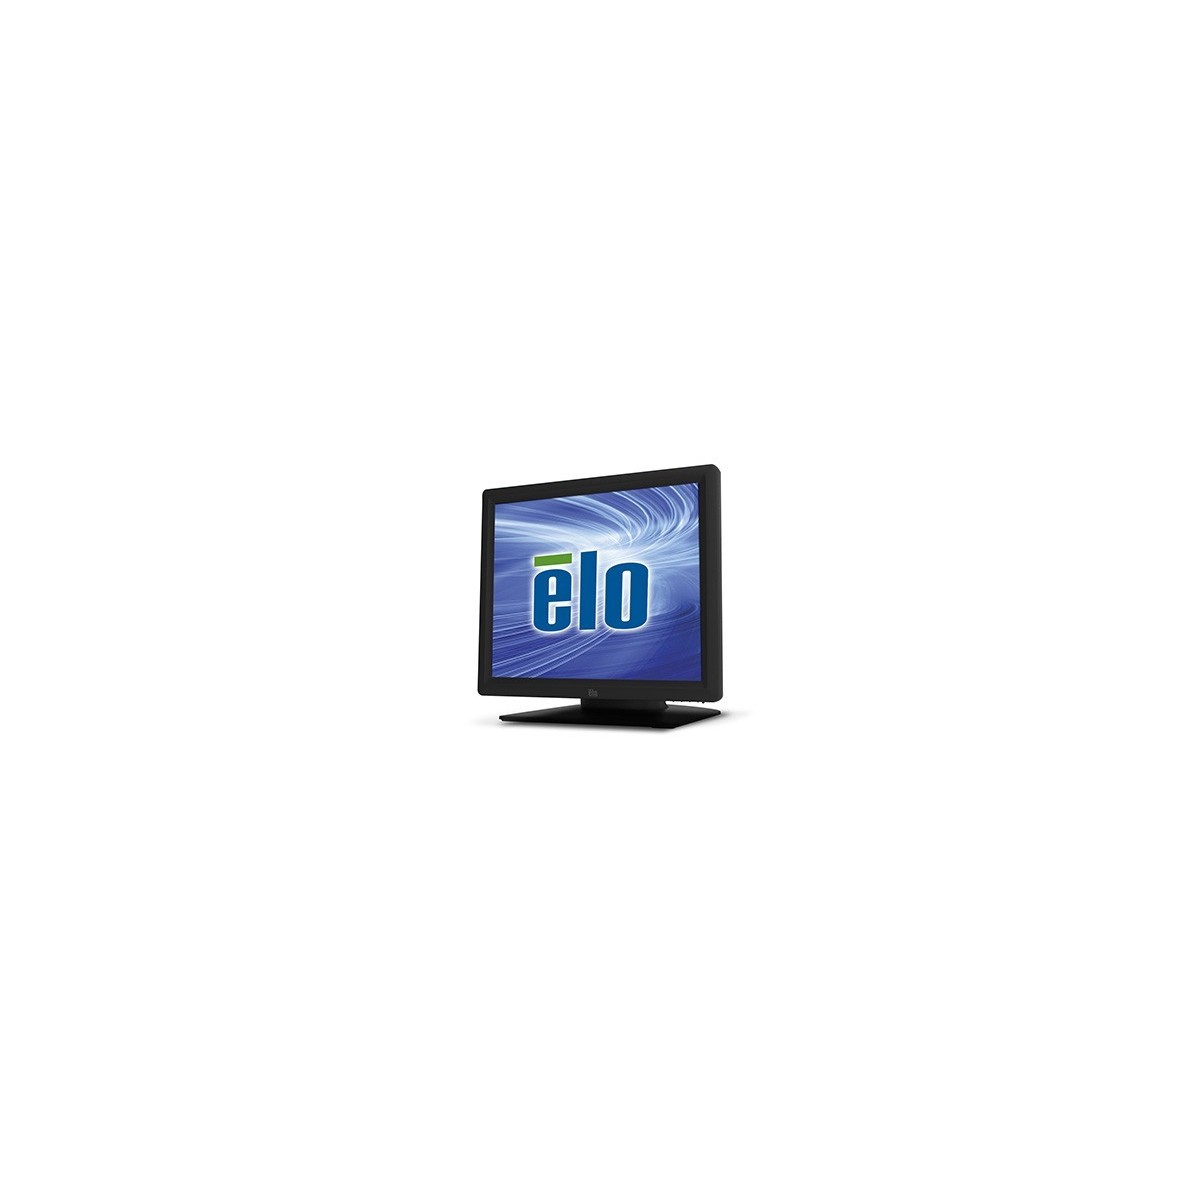 Elo Touch Solutions Elo Touch Solution 1517L Rev B - 38.1 cm (15) - 225 cd/m² - LCD/TFT - 4:3 - 1024 x 768 pixels - LCD